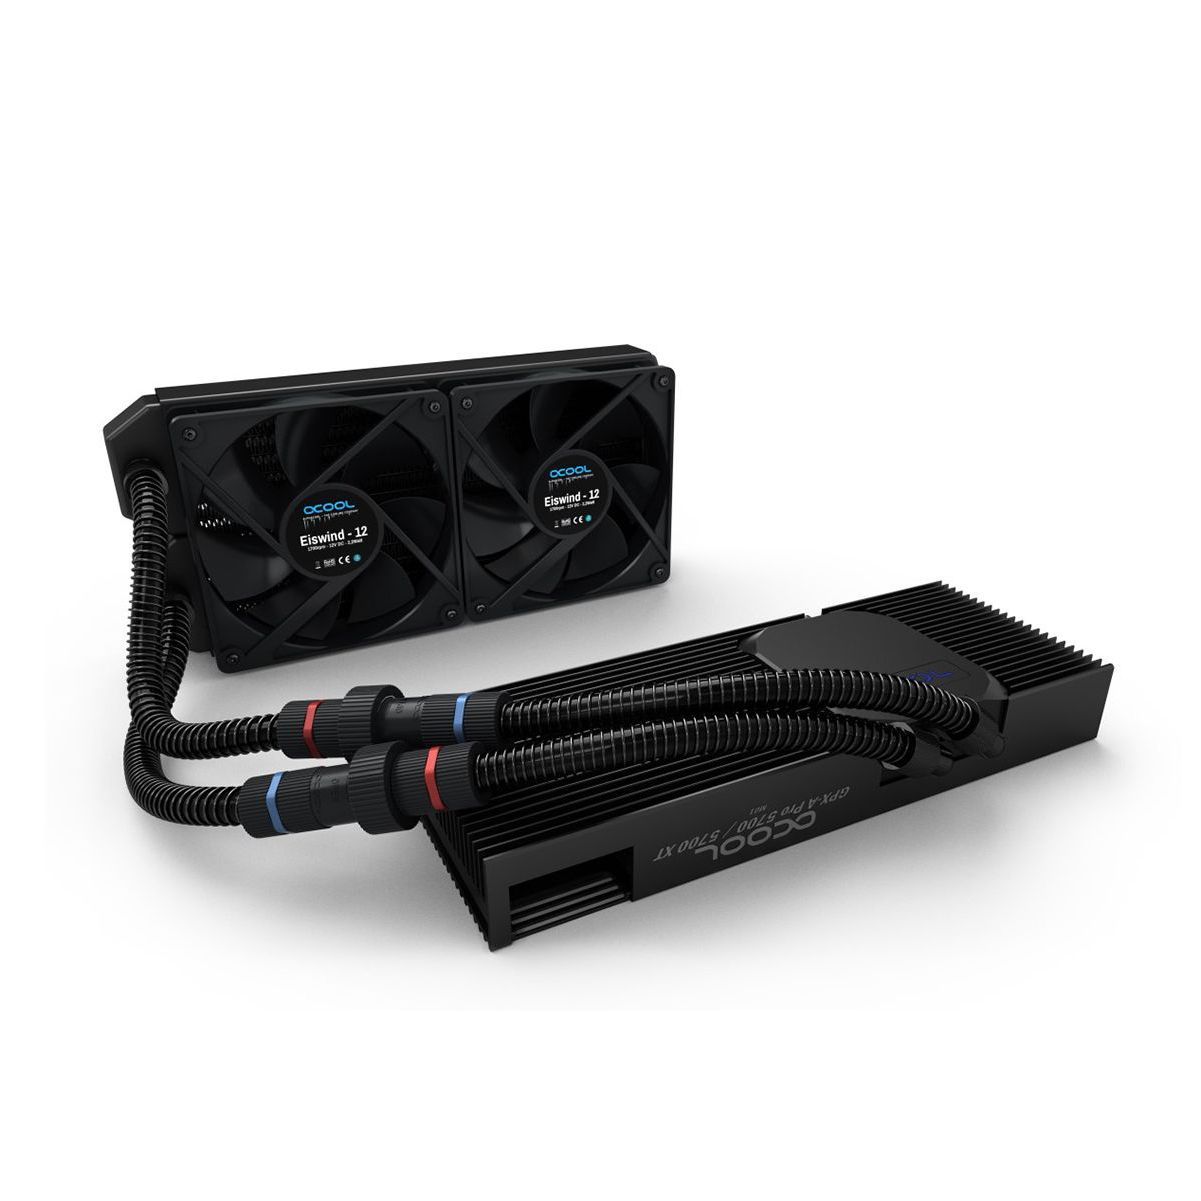 Alphacool Eiswolf 240 GPX Pro AIO GPU Cooler for the Radeon RX 5700 XT